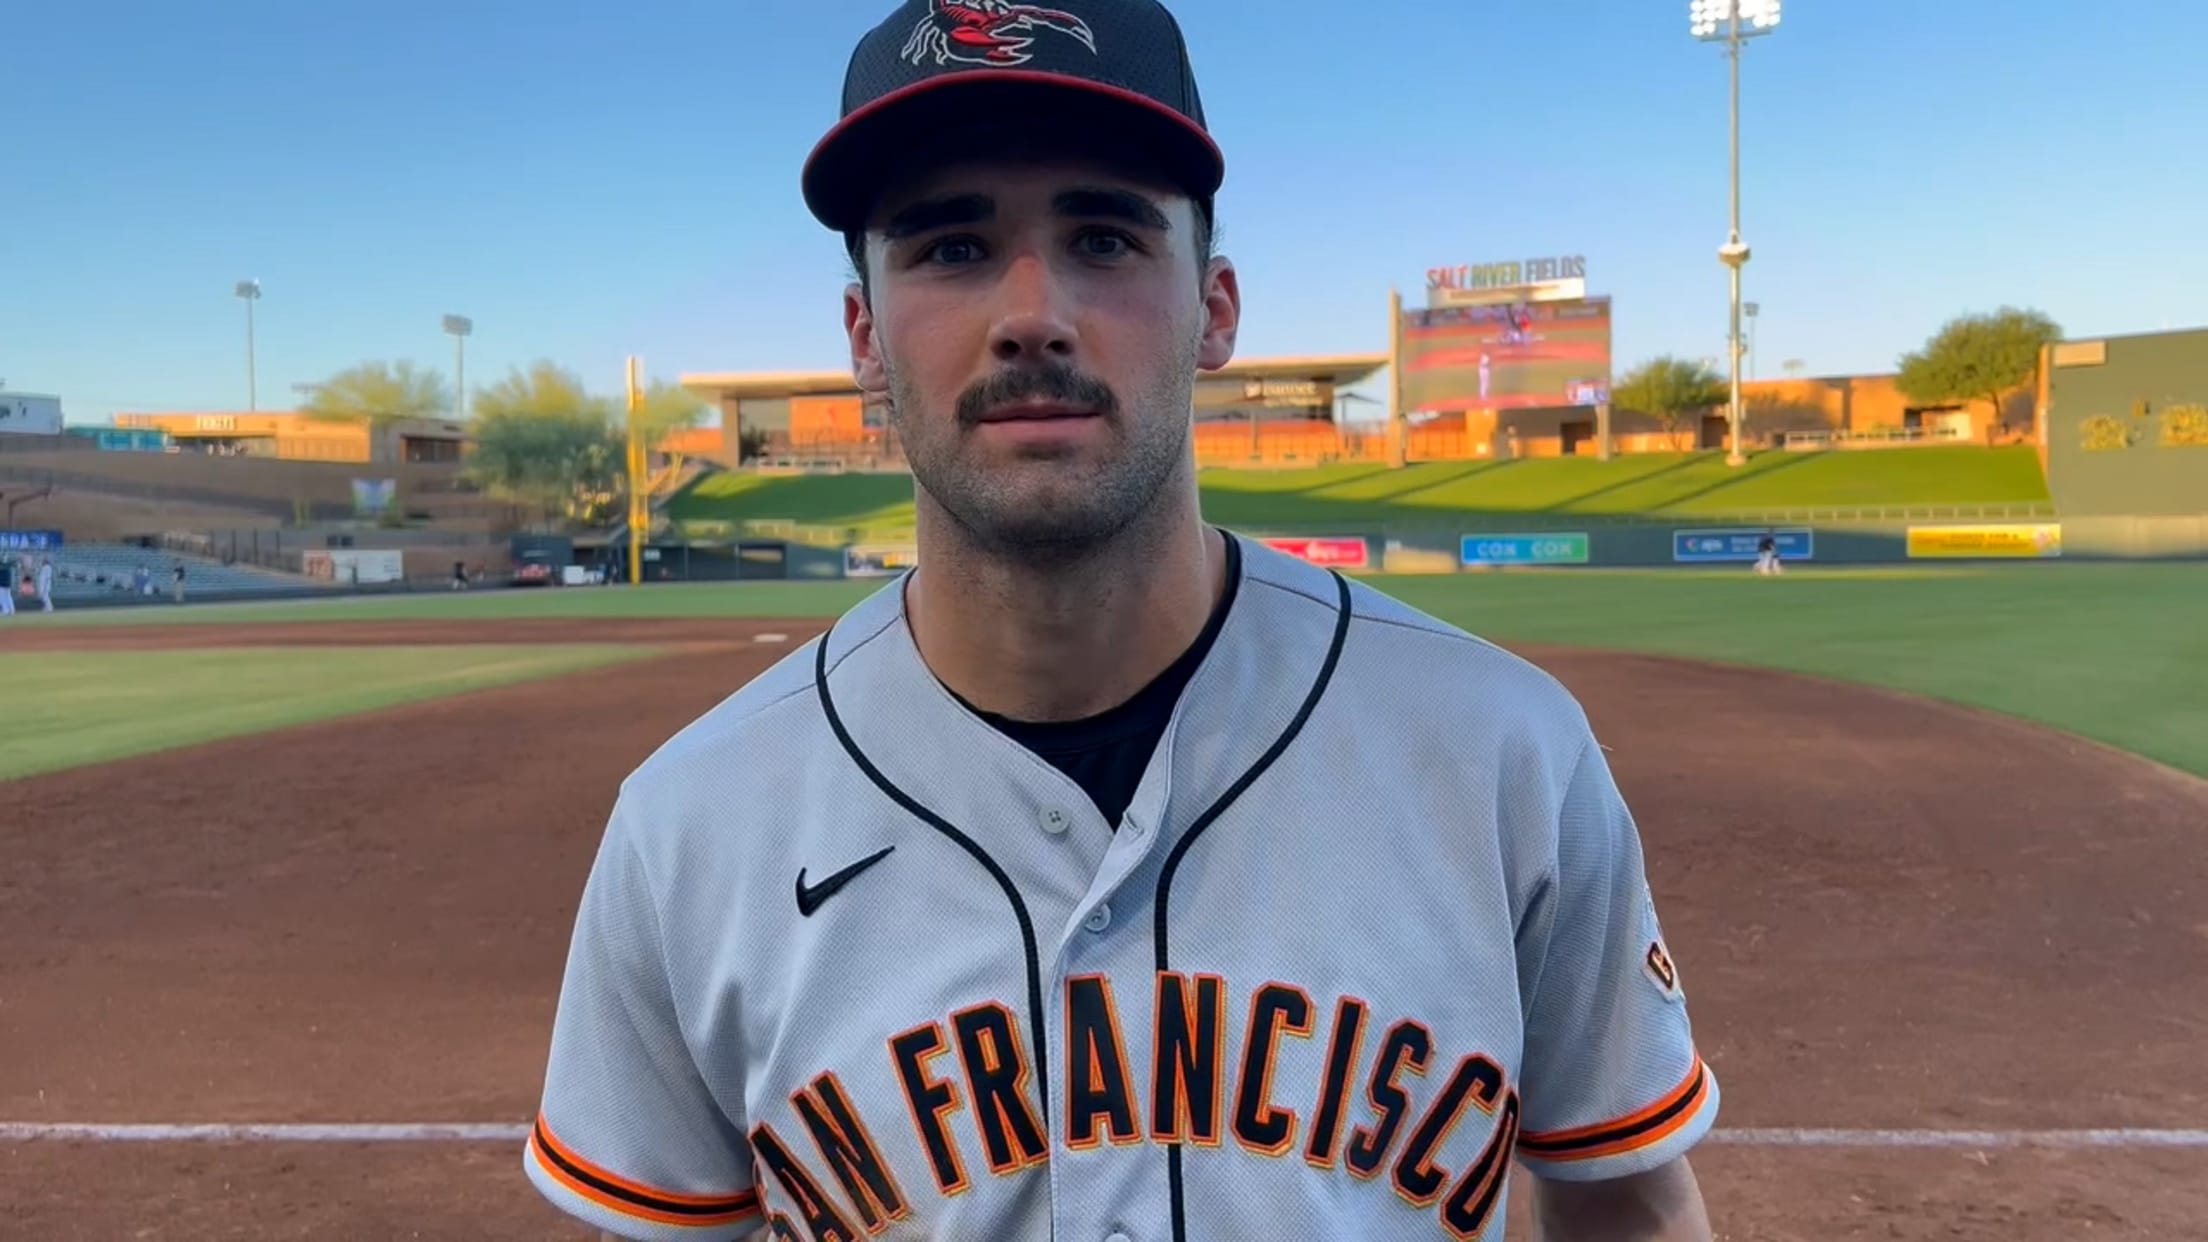 WATCH: San Francisco Giants' #1 prospect Marco Luciano discusses